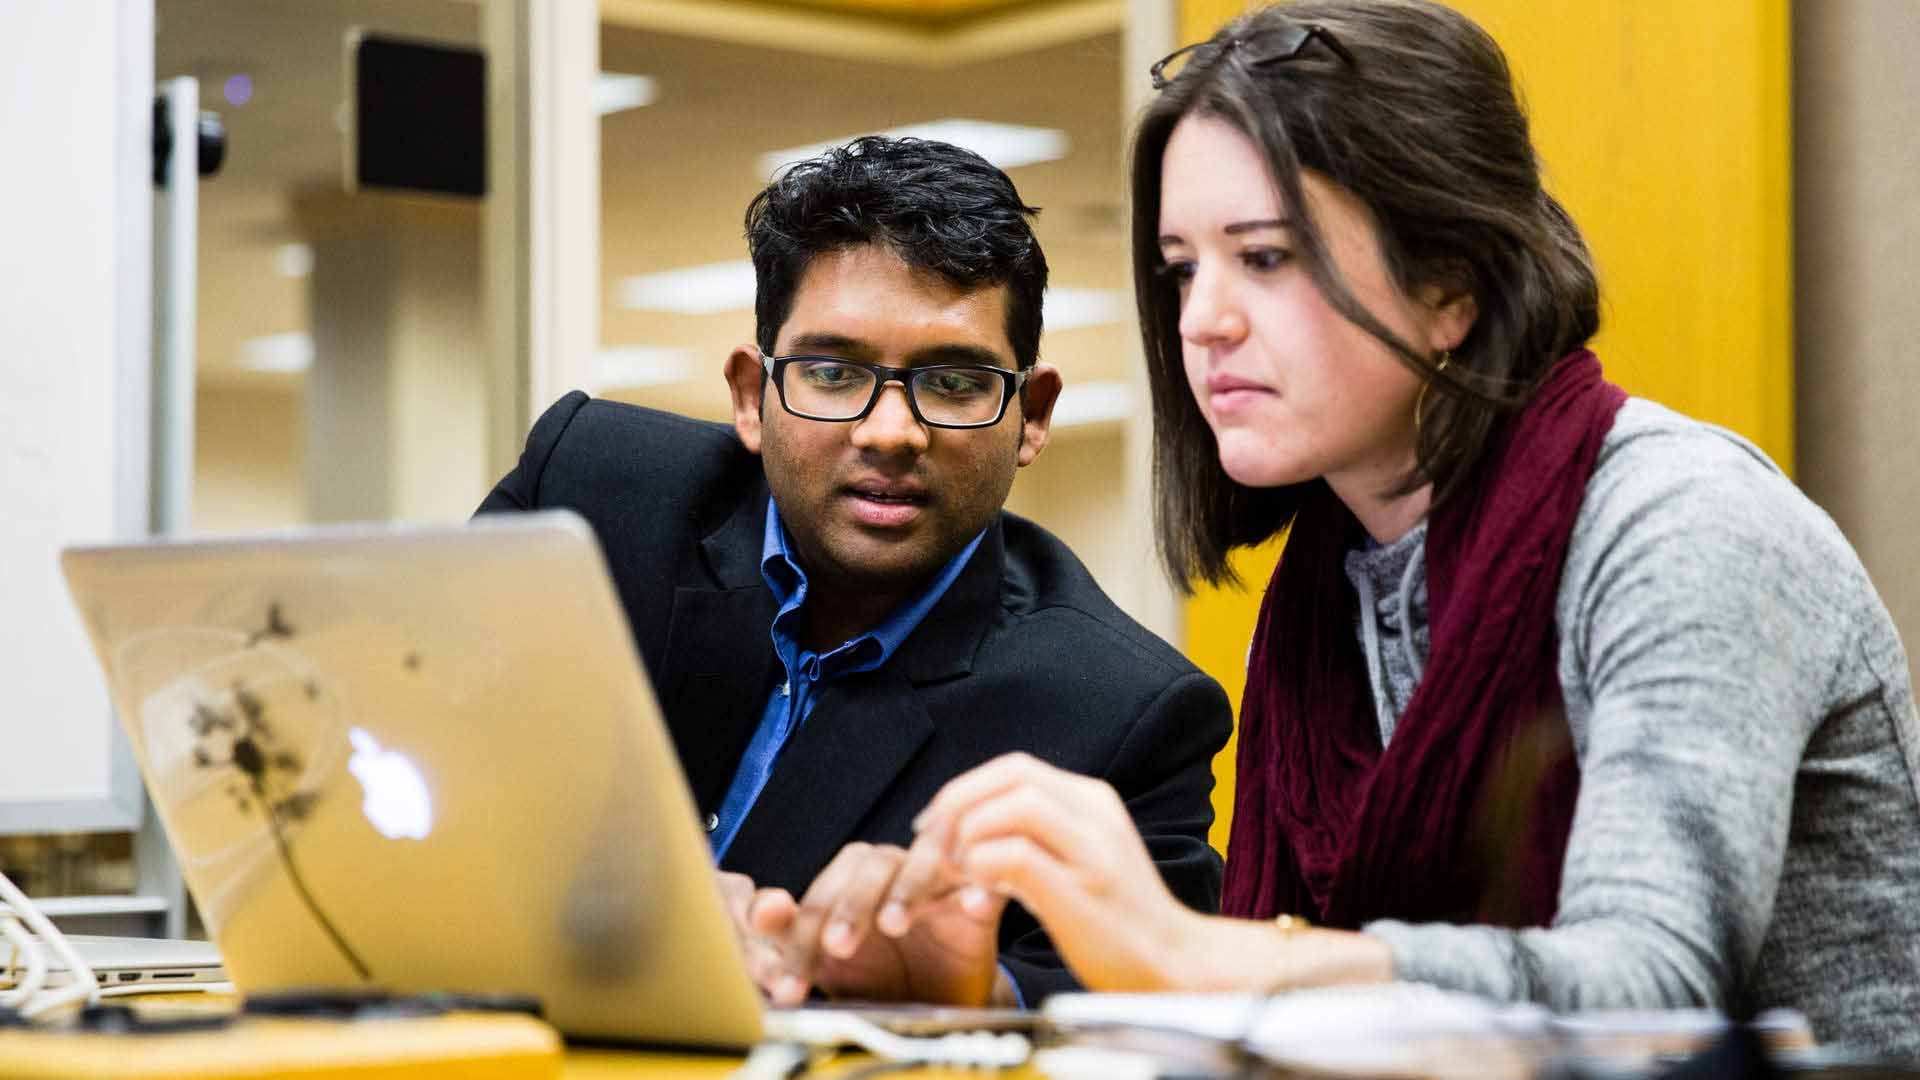 Two students look at a laptop together.